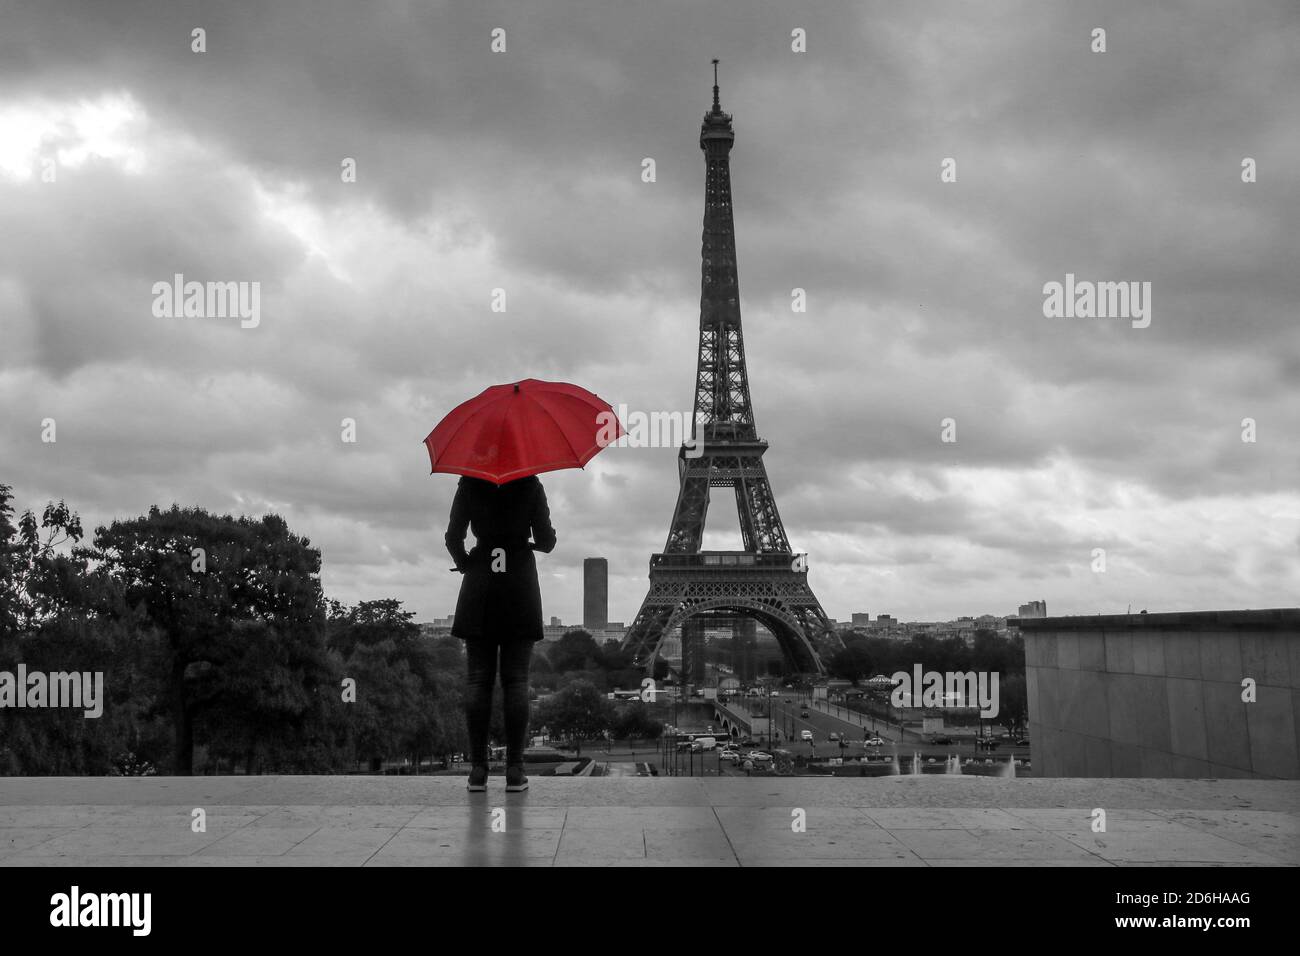 The lady with a red umbrella is standing in front of the Eiffel tower